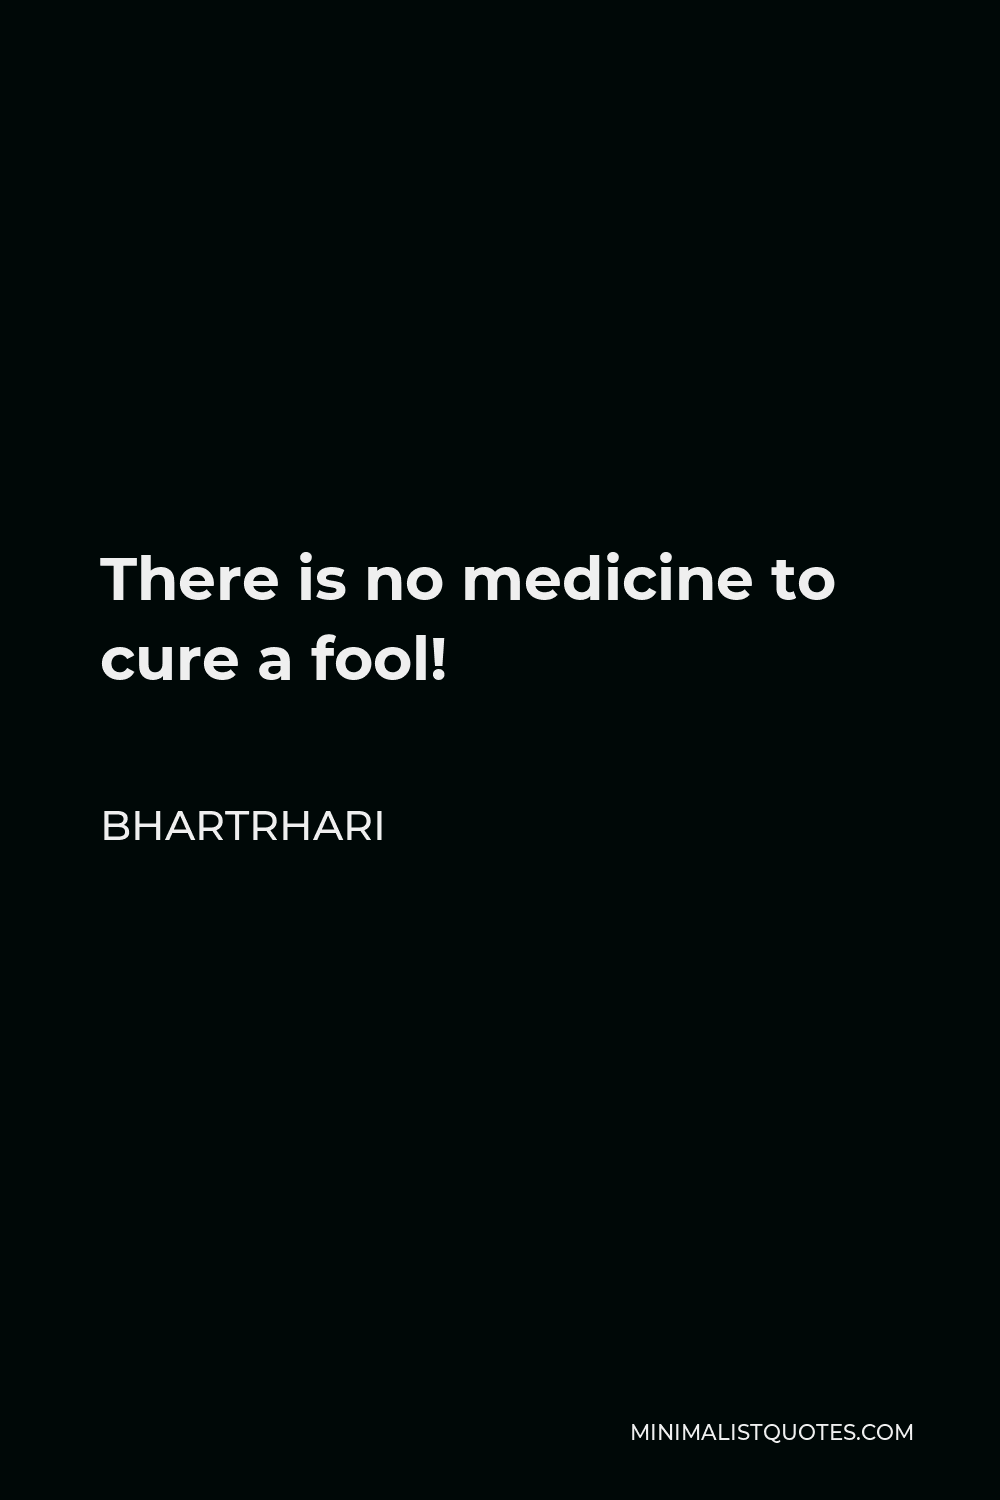 Bhartrhari Quote - There is no medicine to cure a fool!